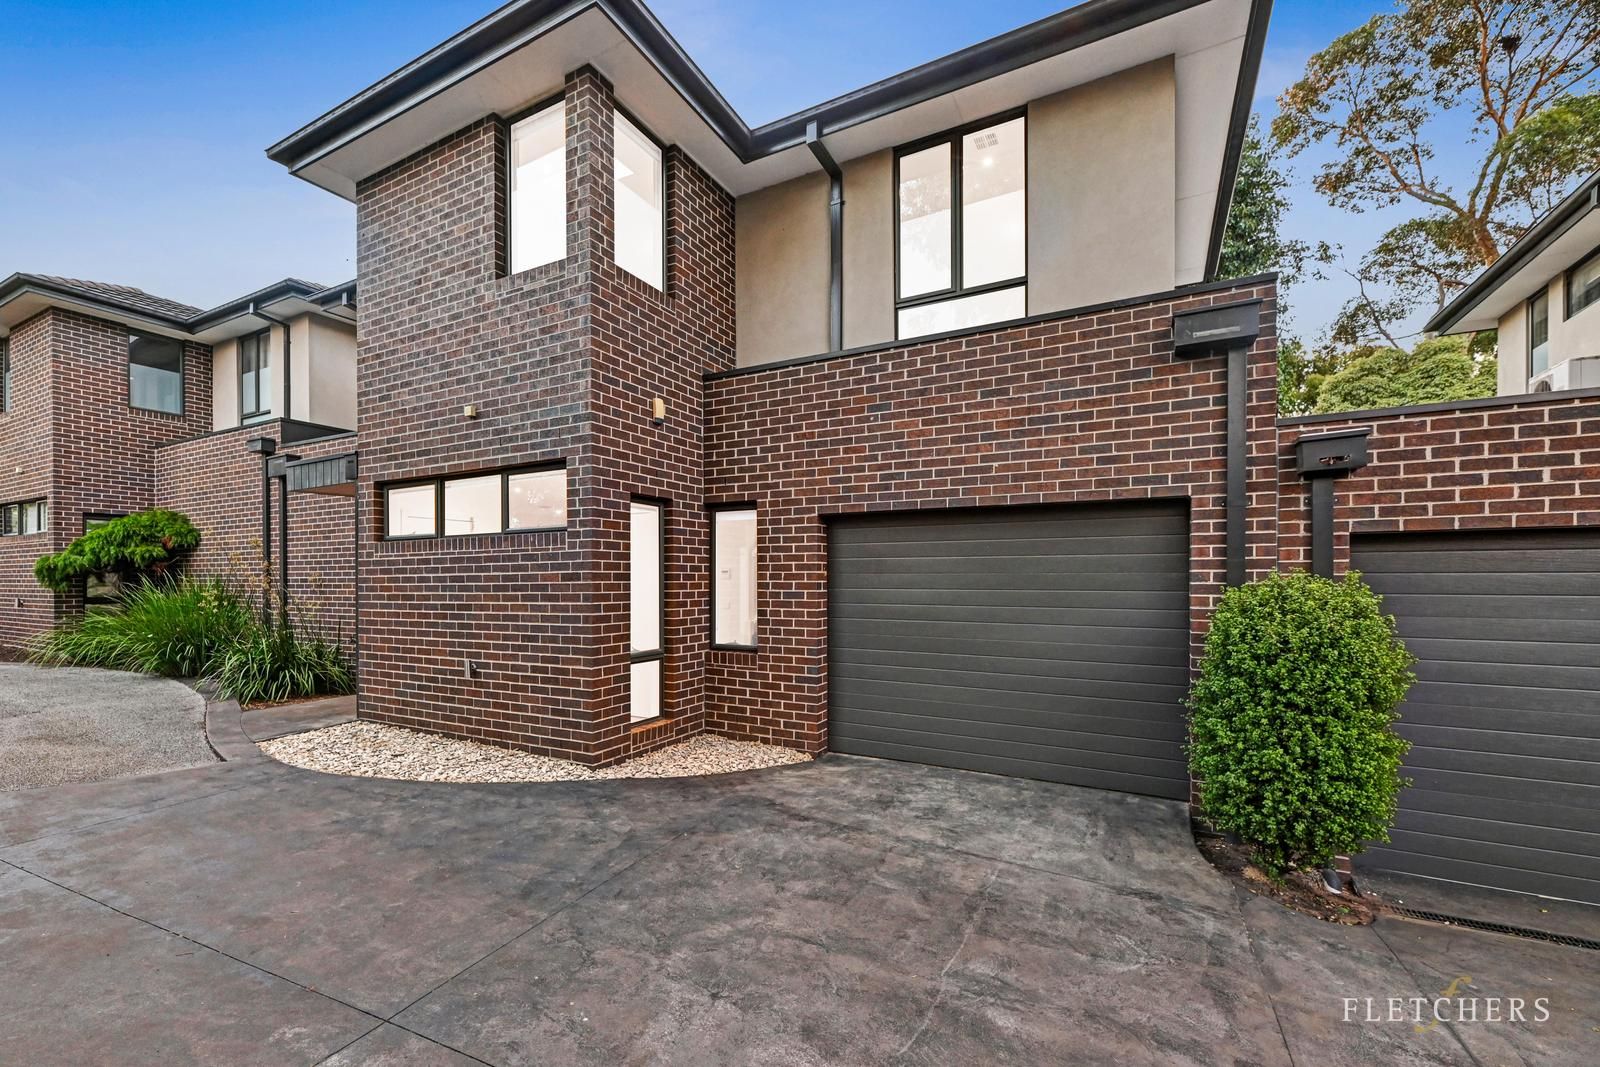 2 bedrooms Townhouse in 3/128 Oban Road RINGWOOD NORTH VIC, 3134